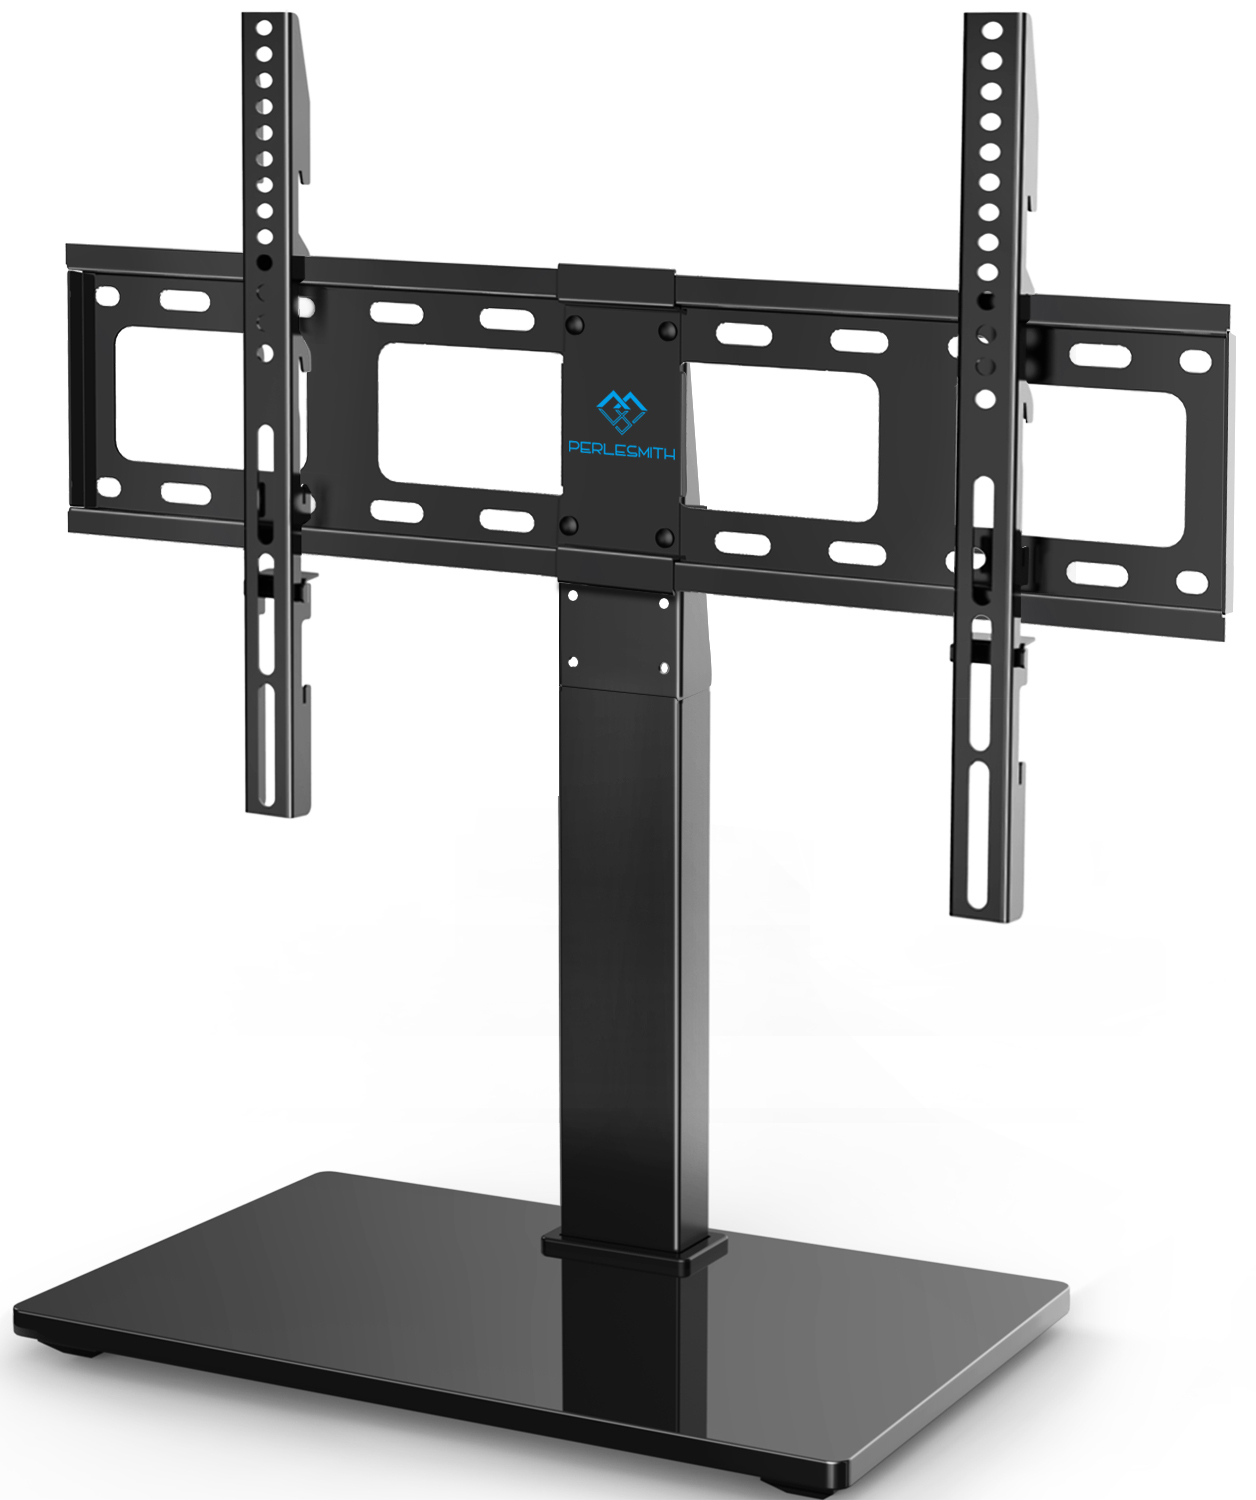 PERLESMITH Universal Tabletop TV Stand for Most 37-70" LED with Height Adjustable Max 600x400mm, Holds up to 88 lbs - image 2 of 9